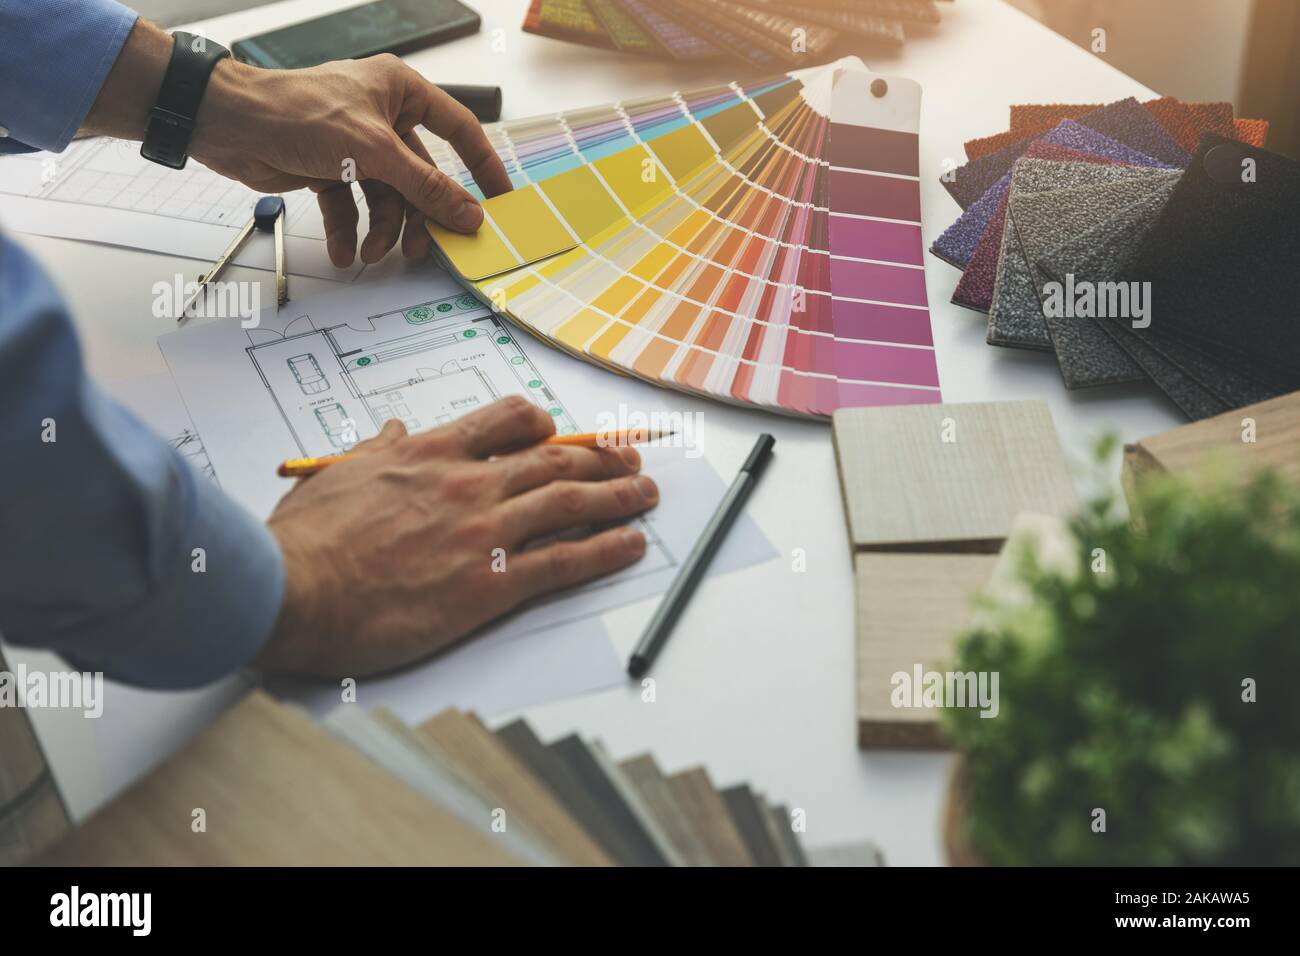 designer choosing paint color from swatch for home interior design project Stock Photo